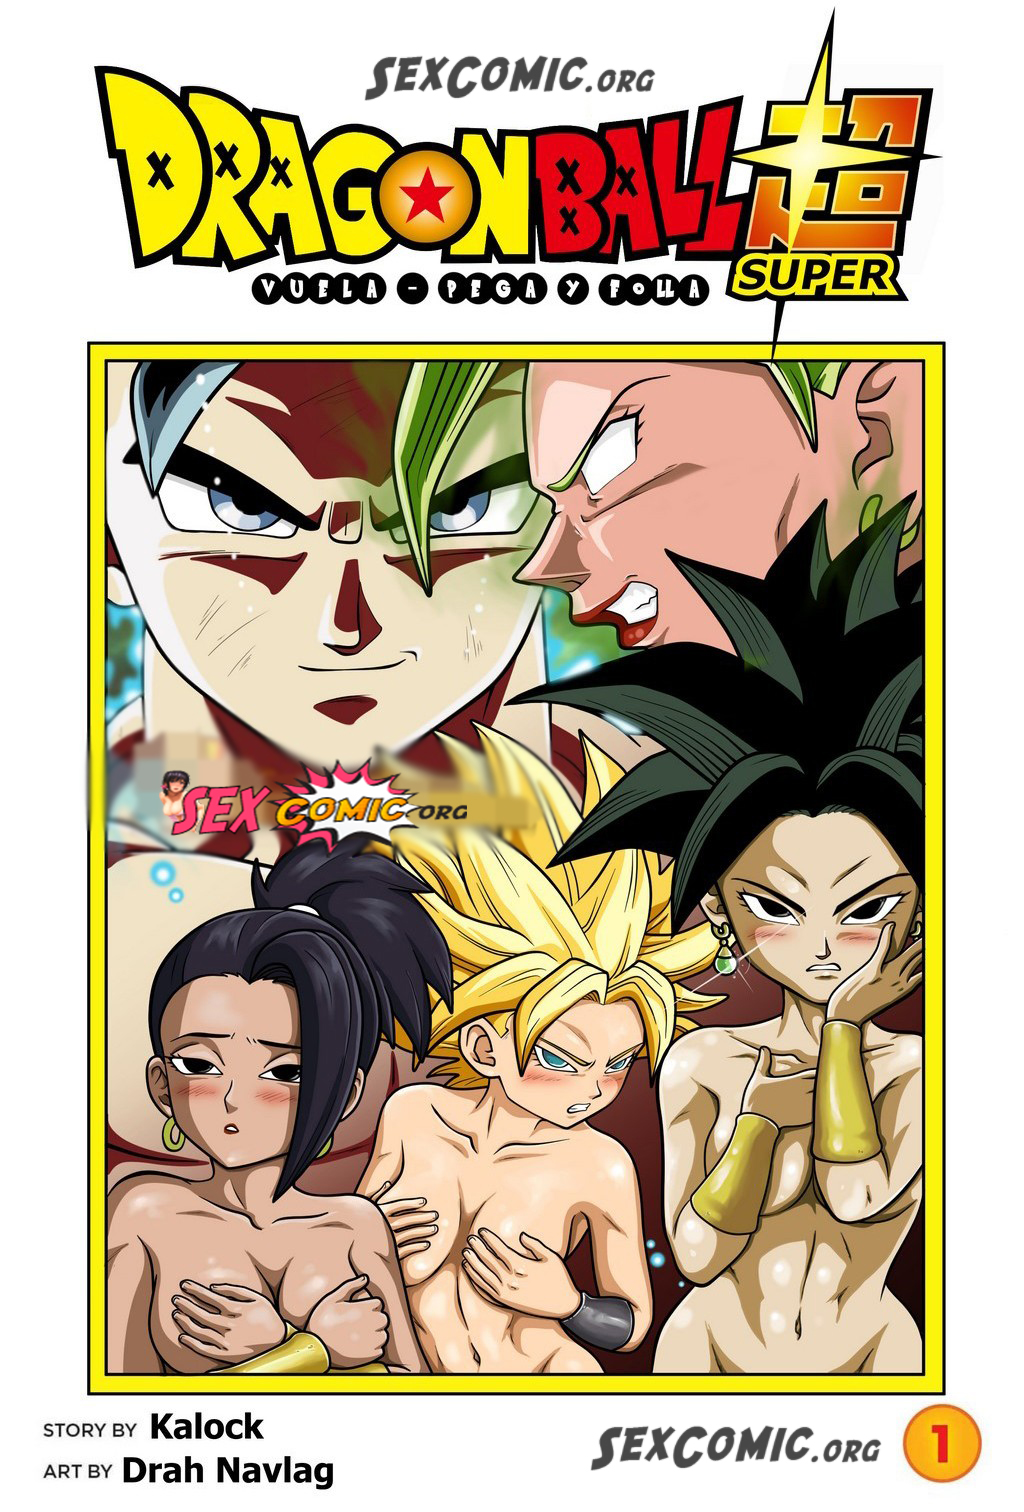 best of Dragon ball anal kale super